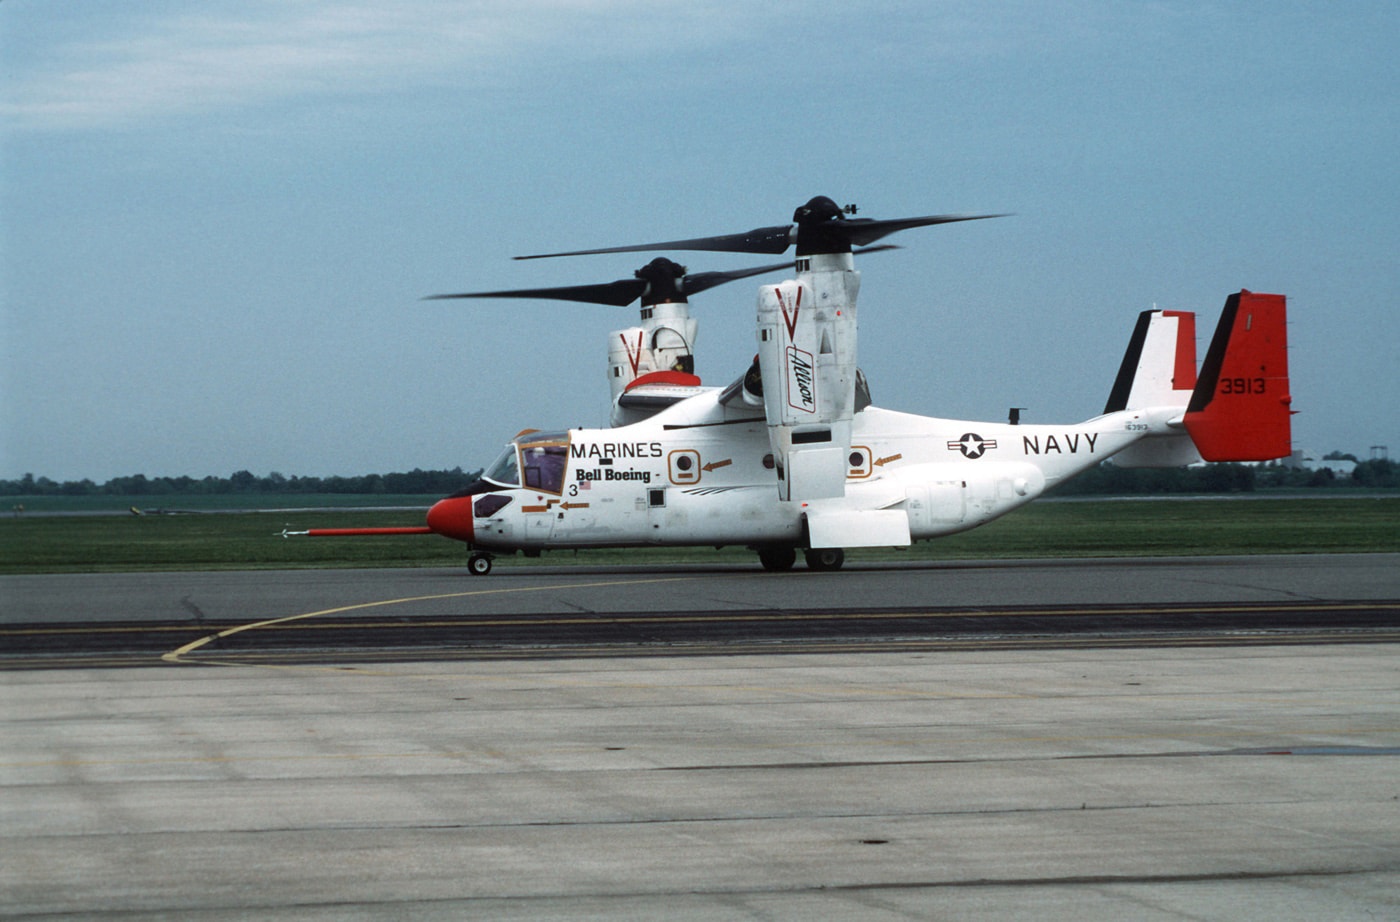 prototype V-22 US Navy and Marine Corps Pax Patuxent River